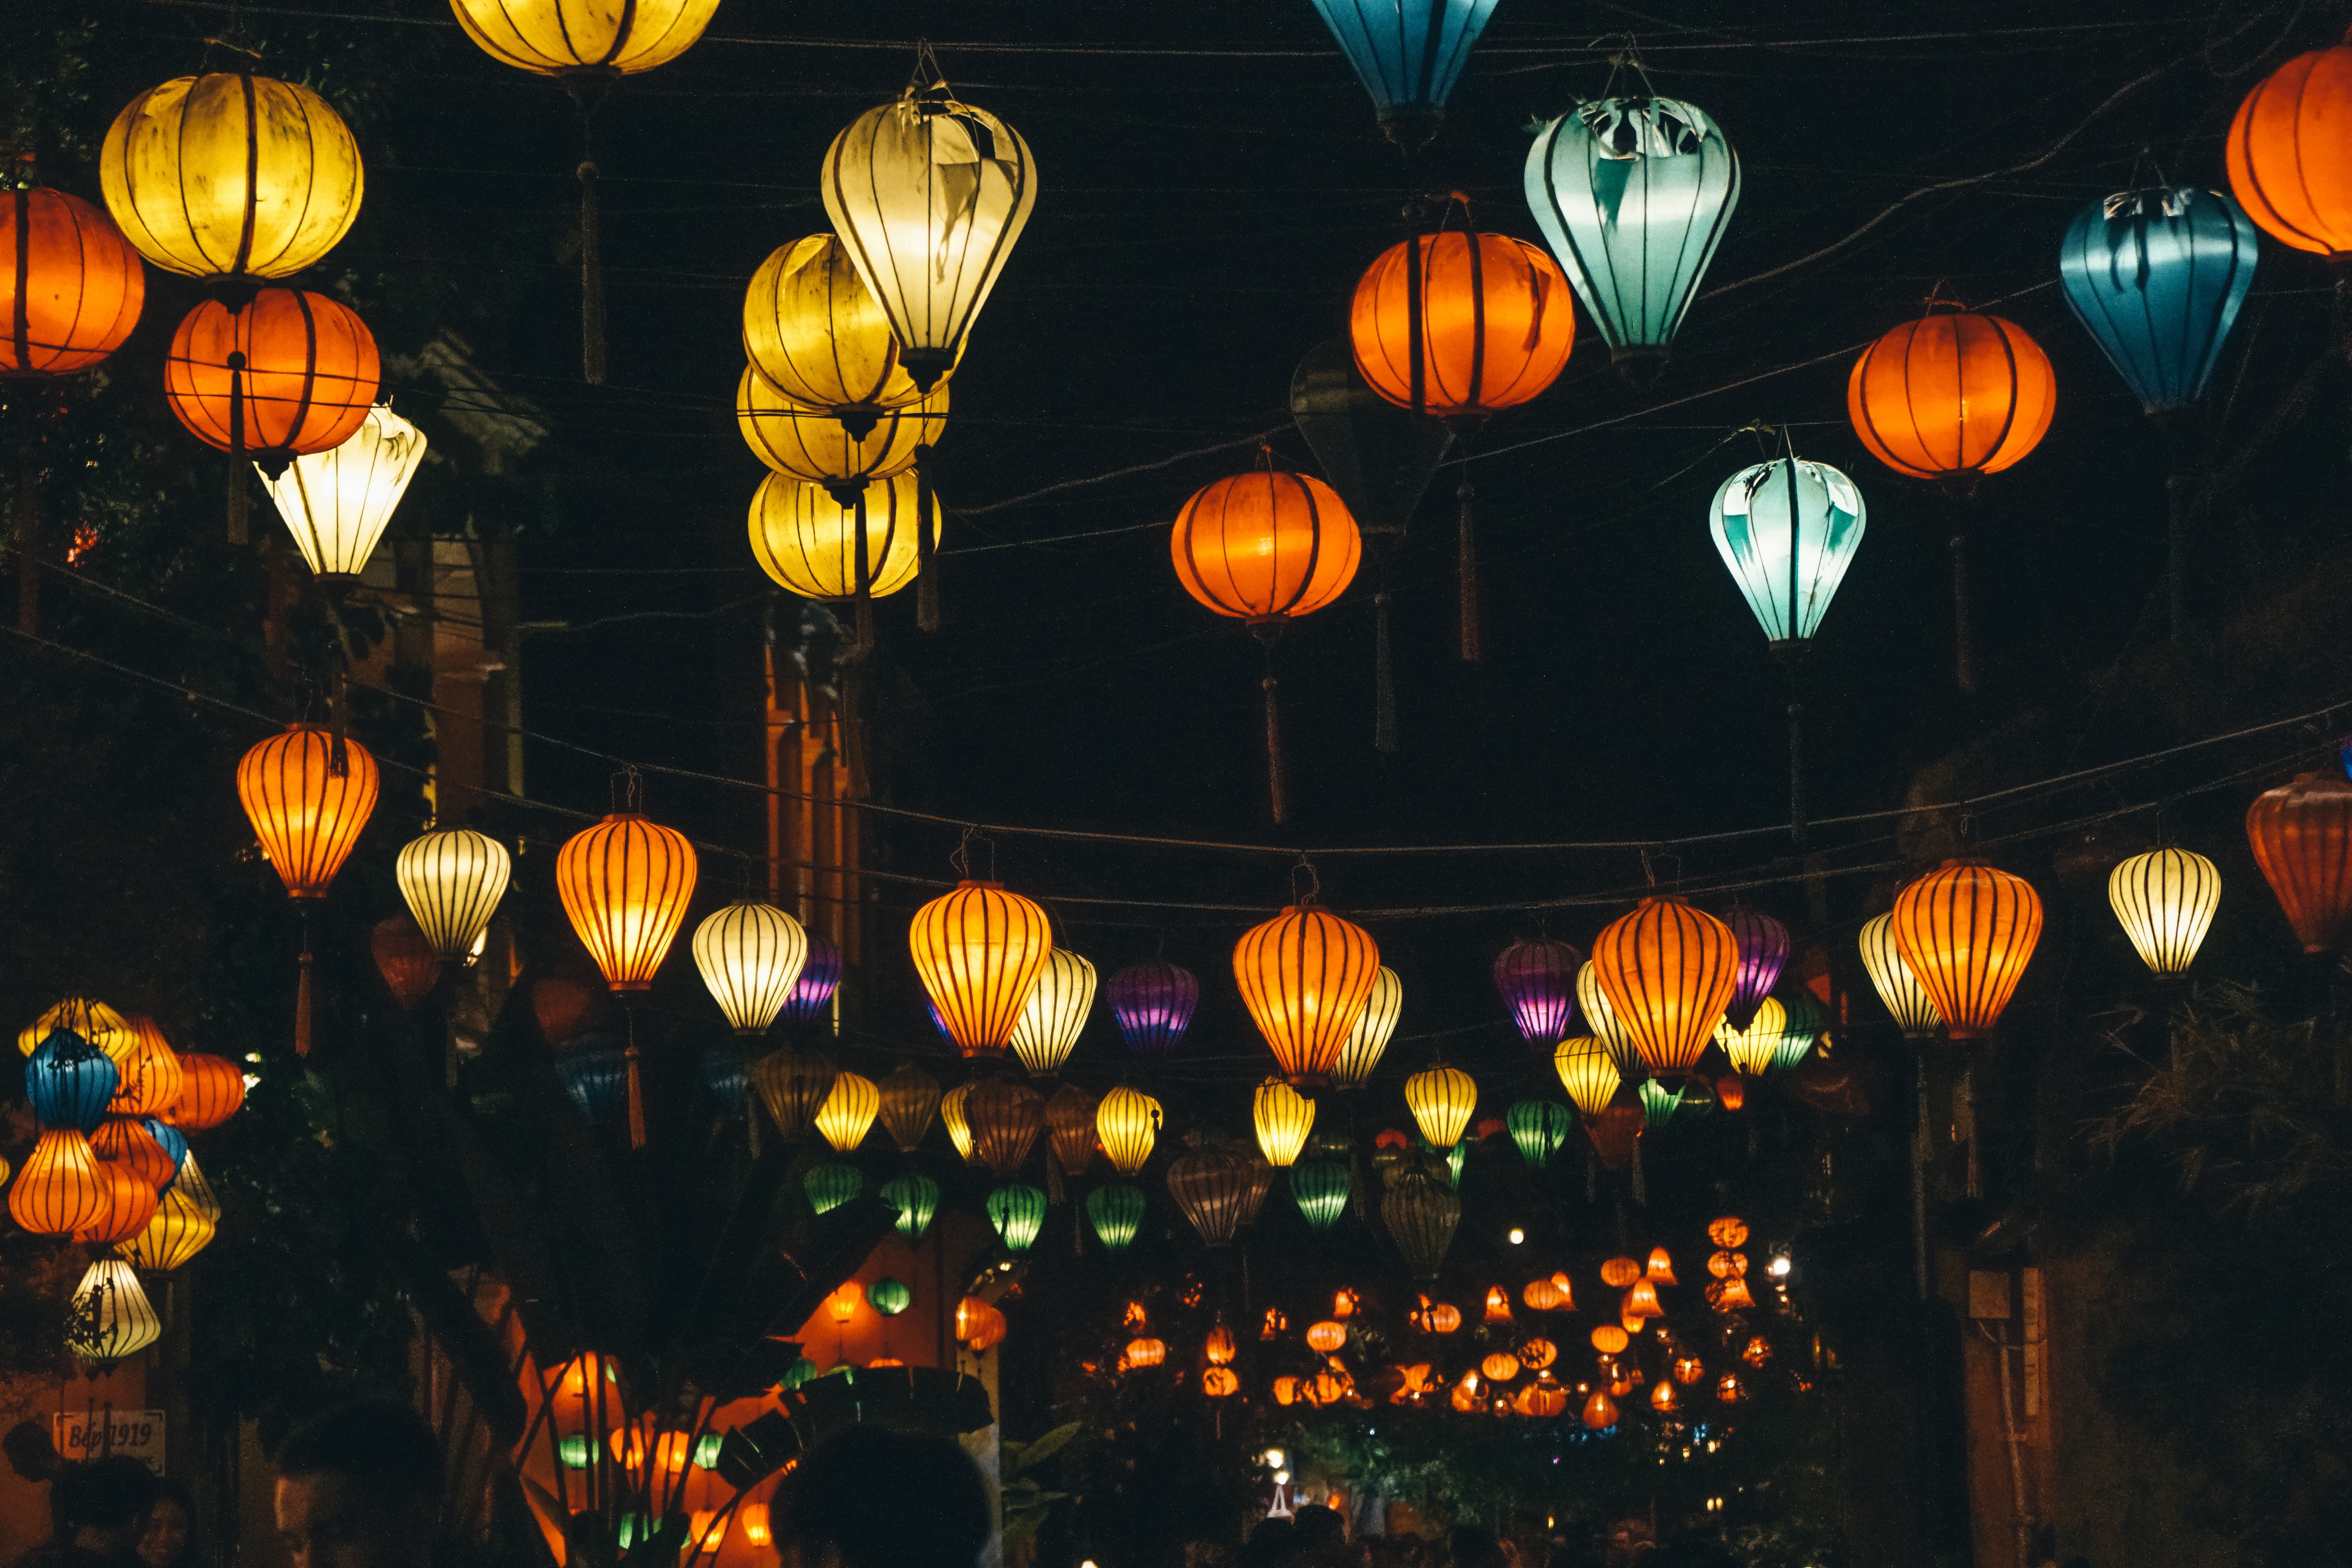 10 Best Things to do in Hoi An, Vietnam